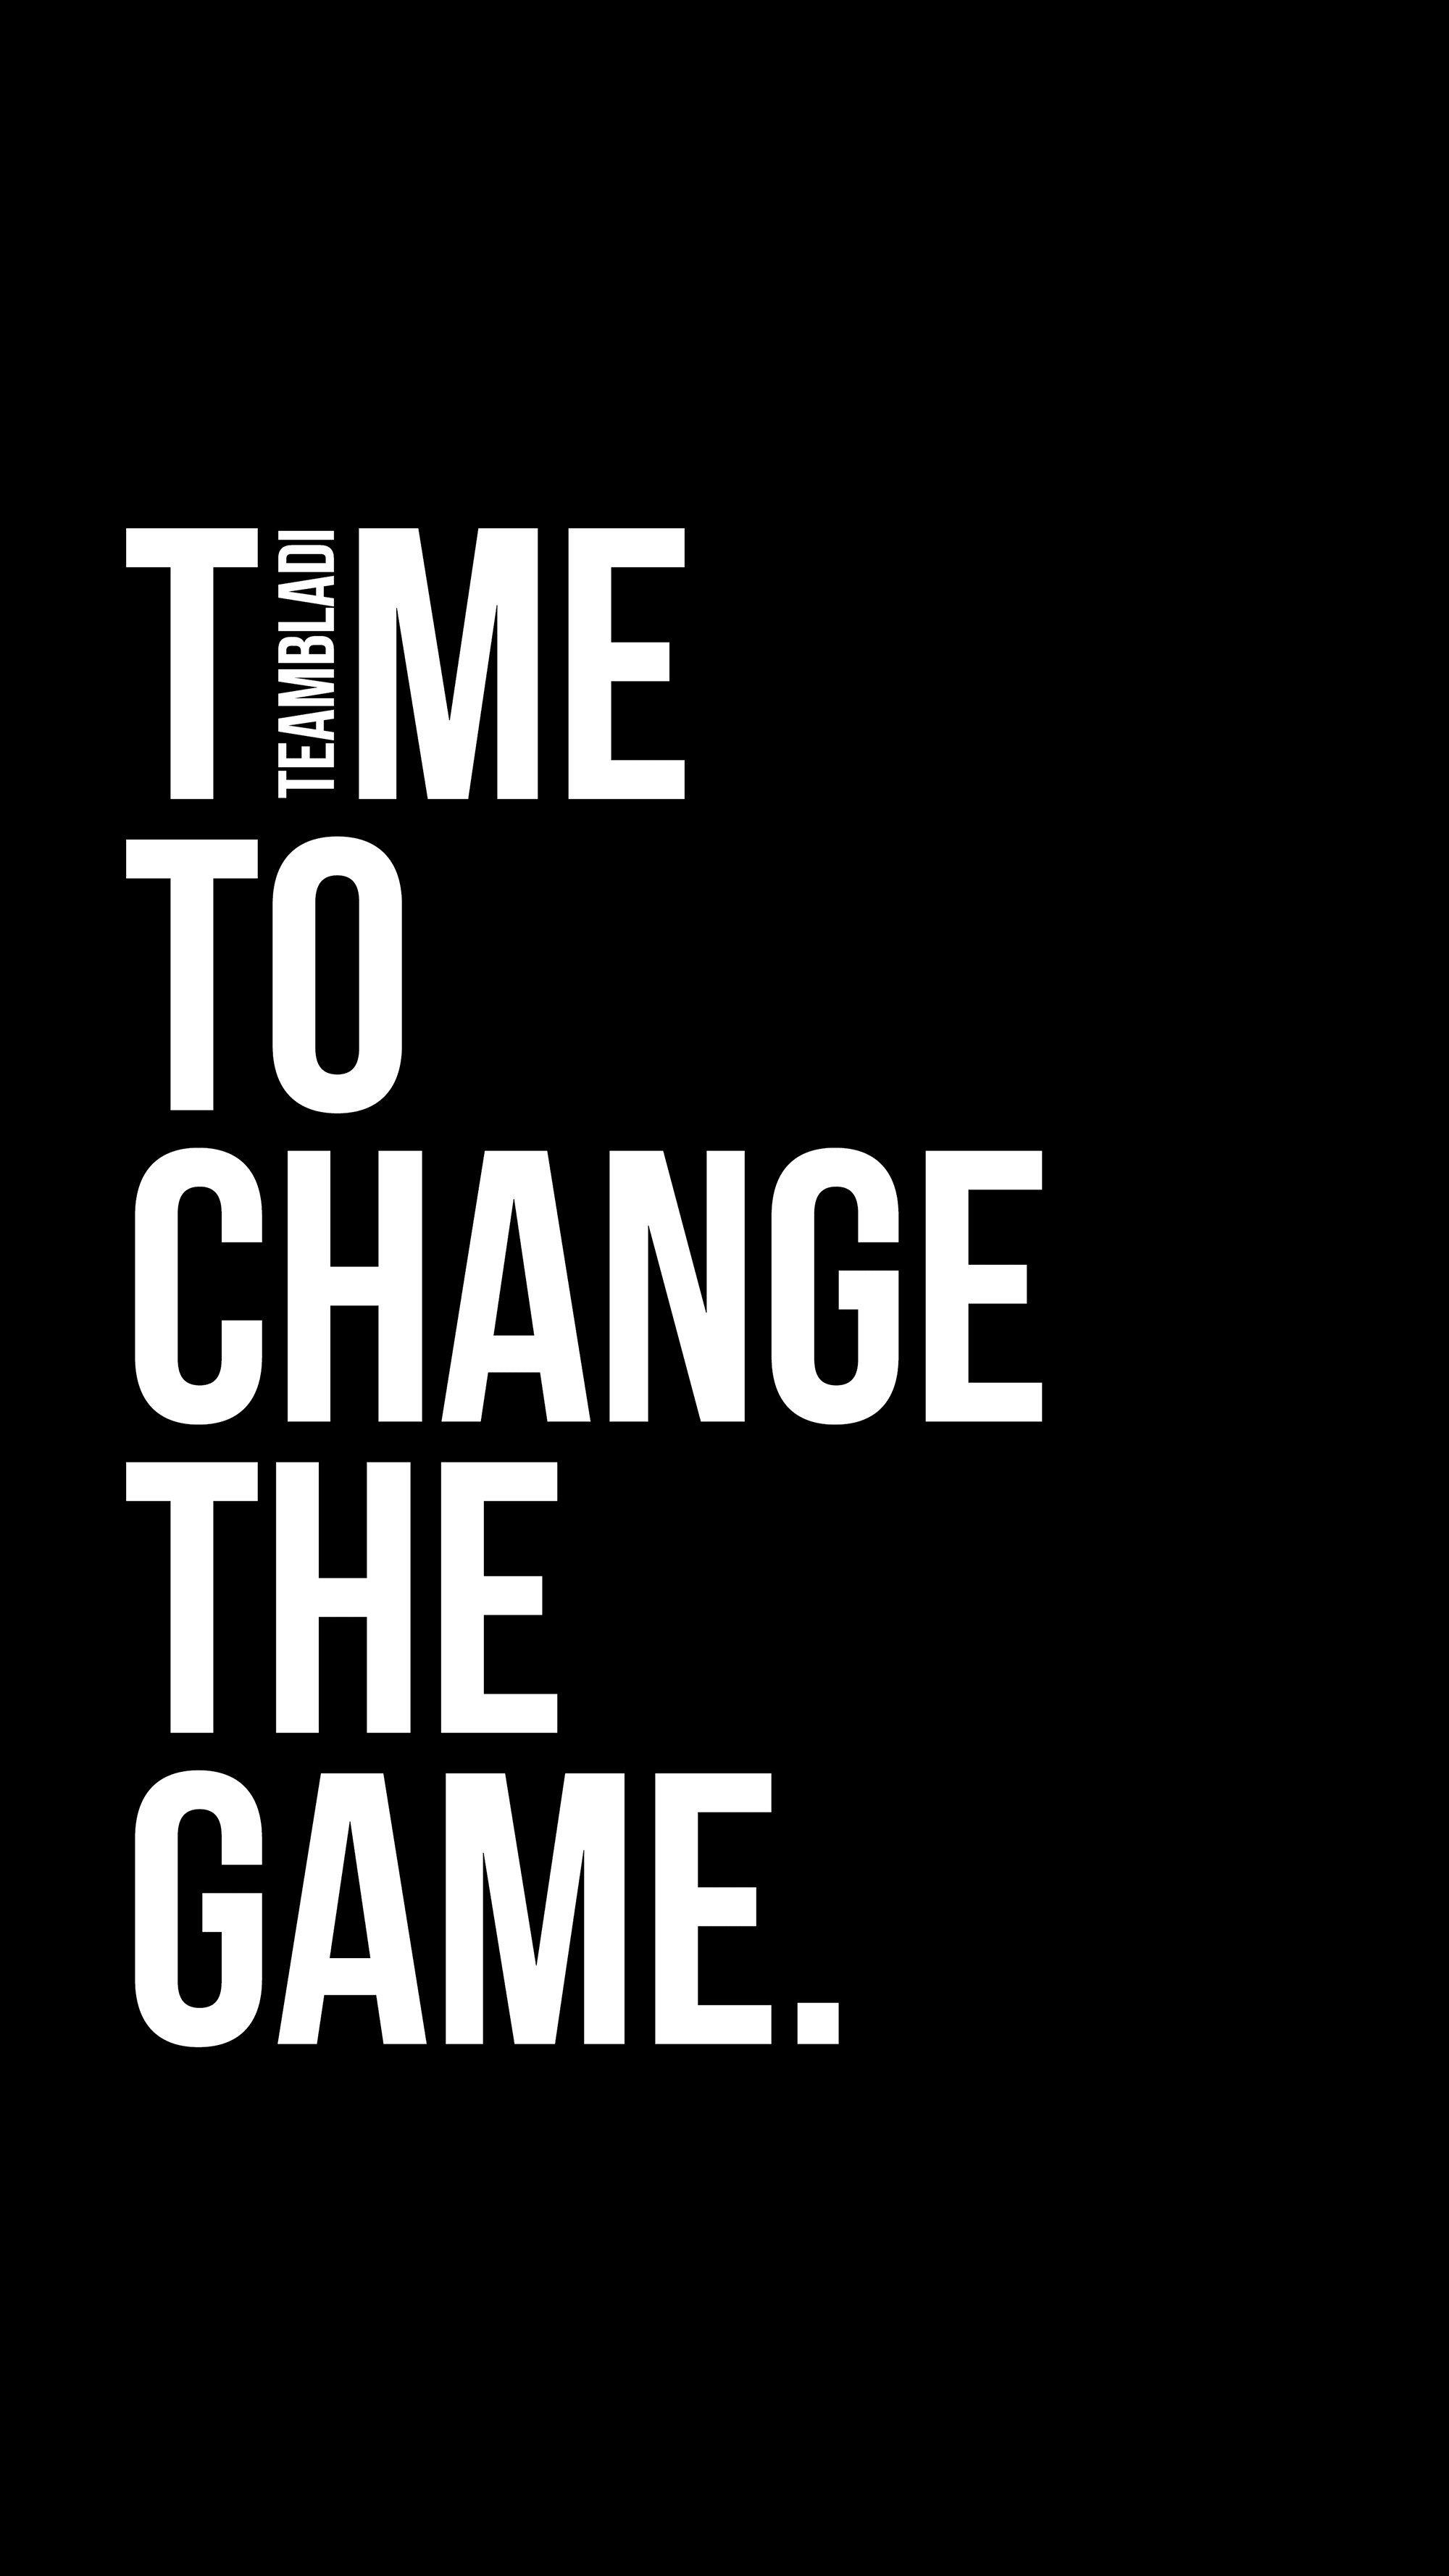 Time to change the game - Motivational